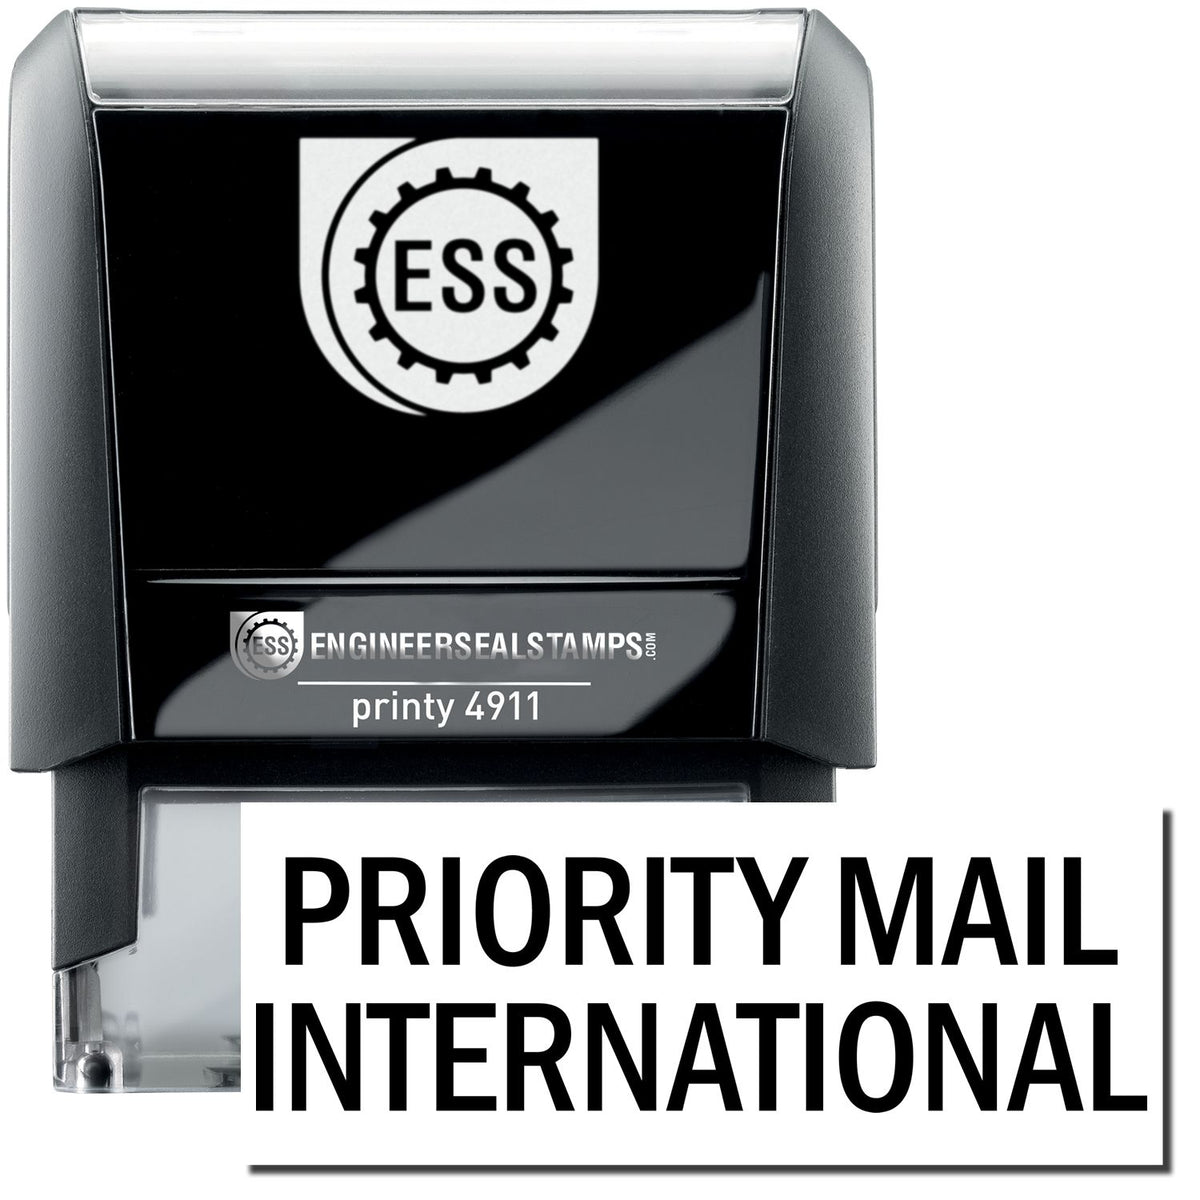 A self-inking stamp with a stamped image showing how the text &quot;PRIORITY MAIL INTERNATIONAL&quot; is displayed after stamping.